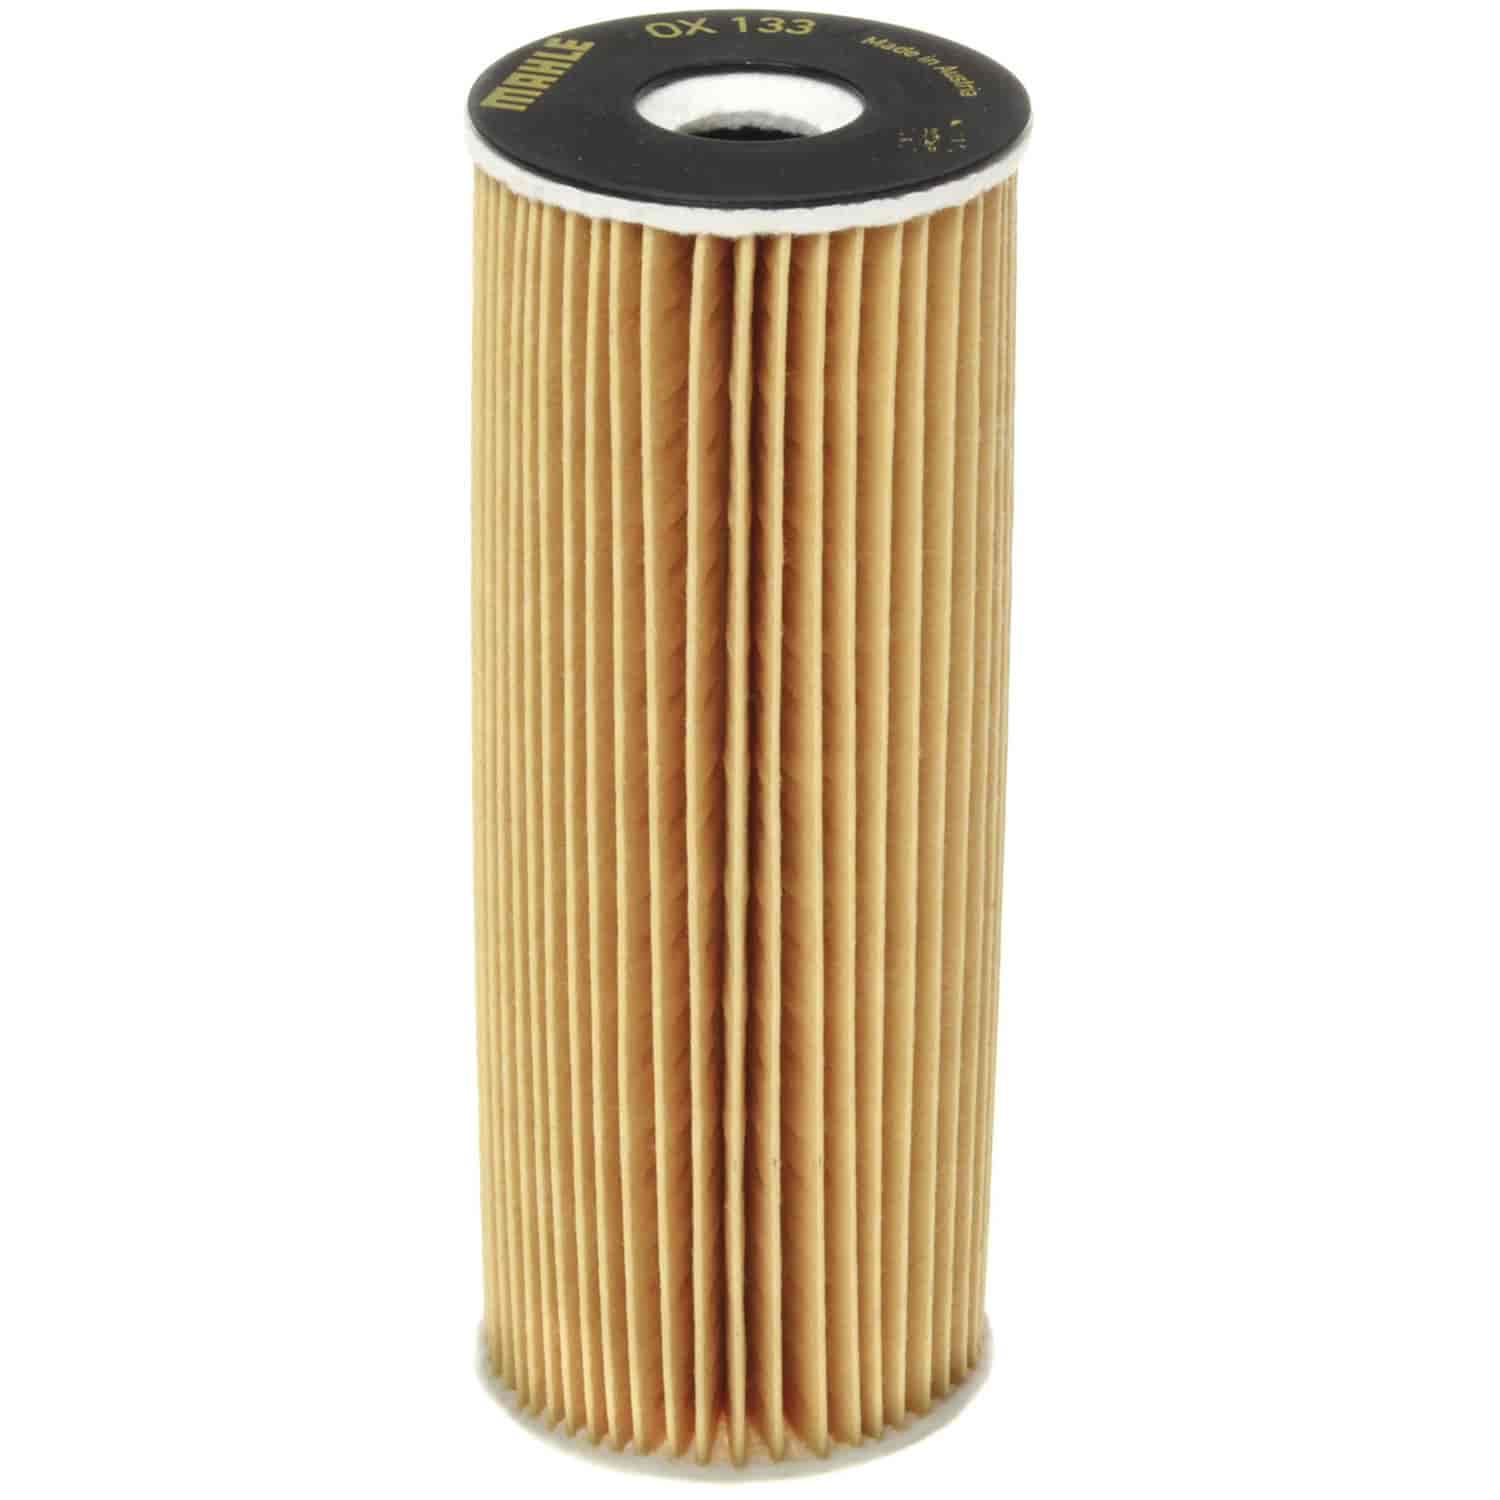 Mahle Oil Filter Mercedes Benz 200 280 300 320 Series 1992-1993